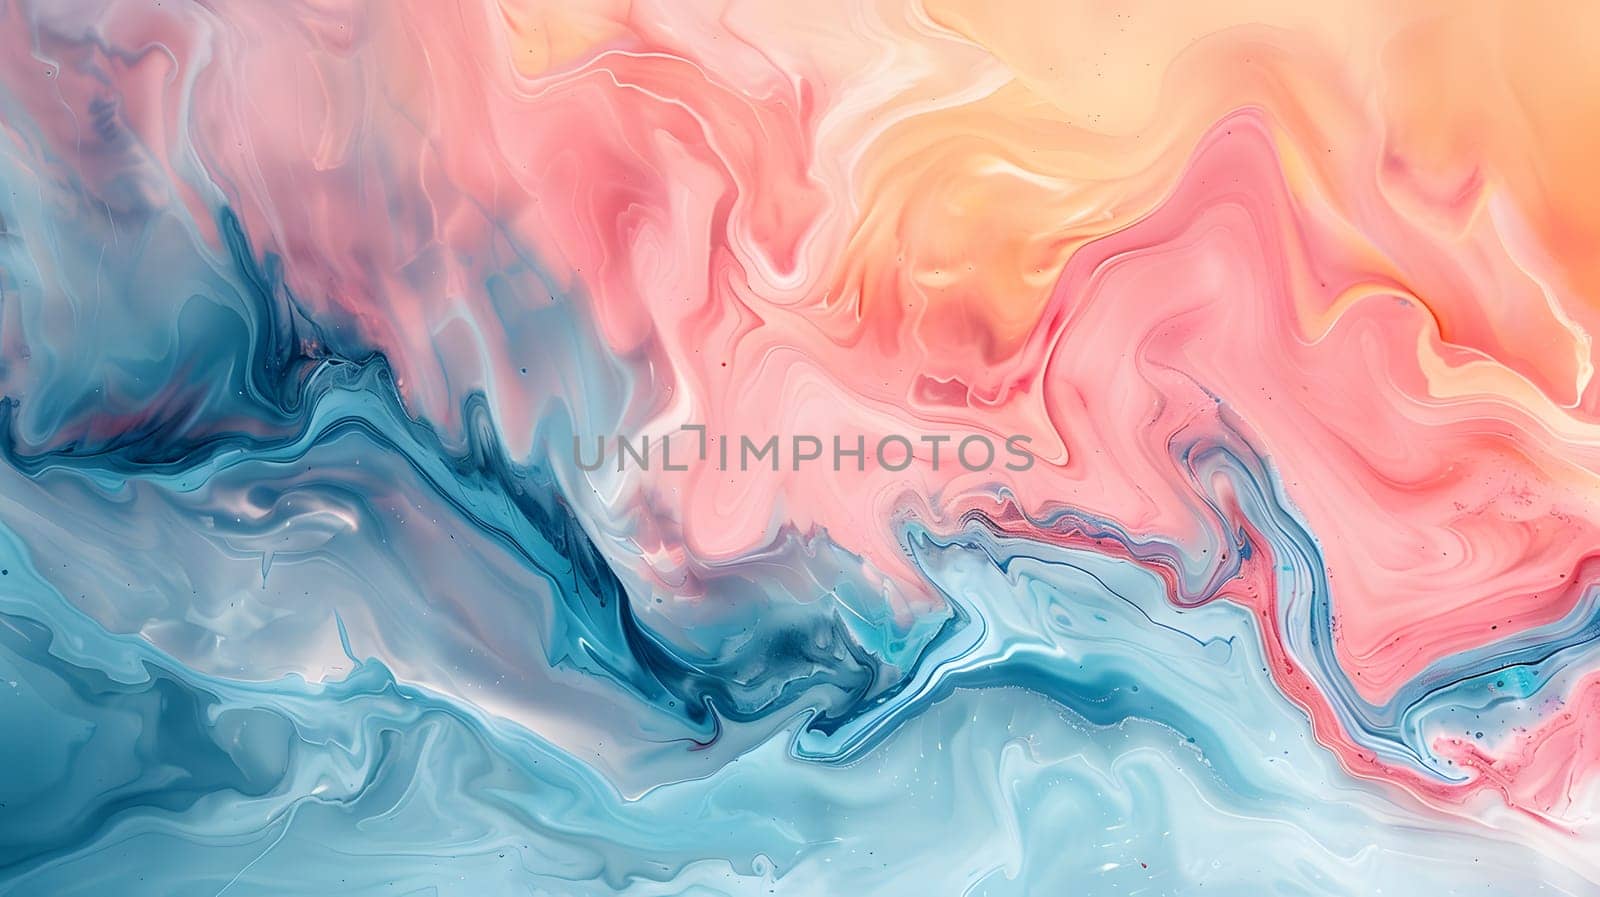 A close up of a vibrant marble texture resembling a mix of liquid art paint, featuring electric blue waves and patterns inspired by geological phenomena